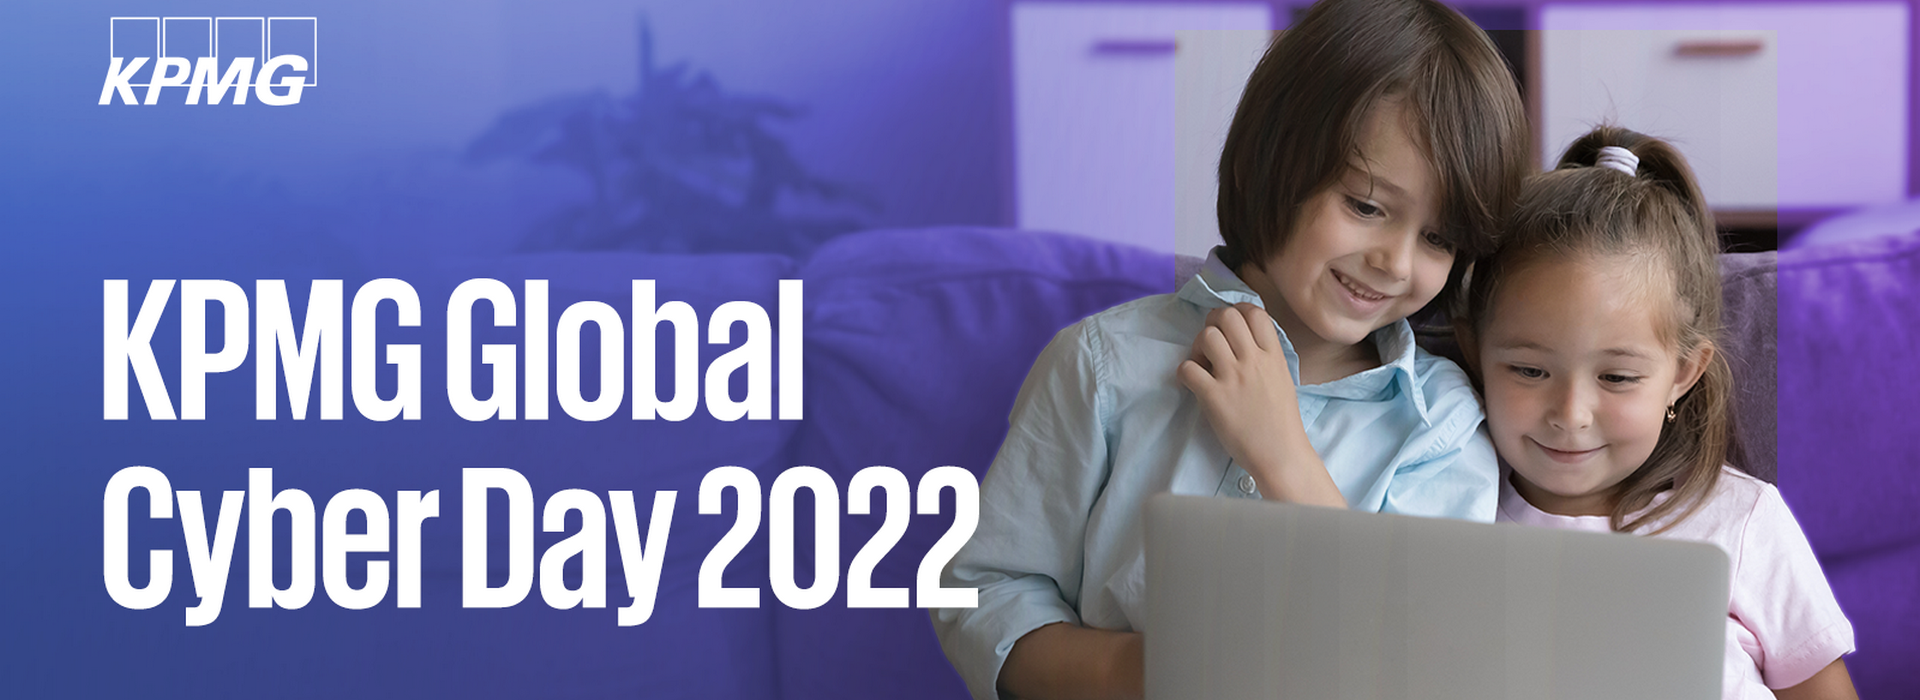 KPMG Global Cyber Day 2022: Cybersecurity Consultants to Run Educational Sessions for Junior and Senior School Students in October